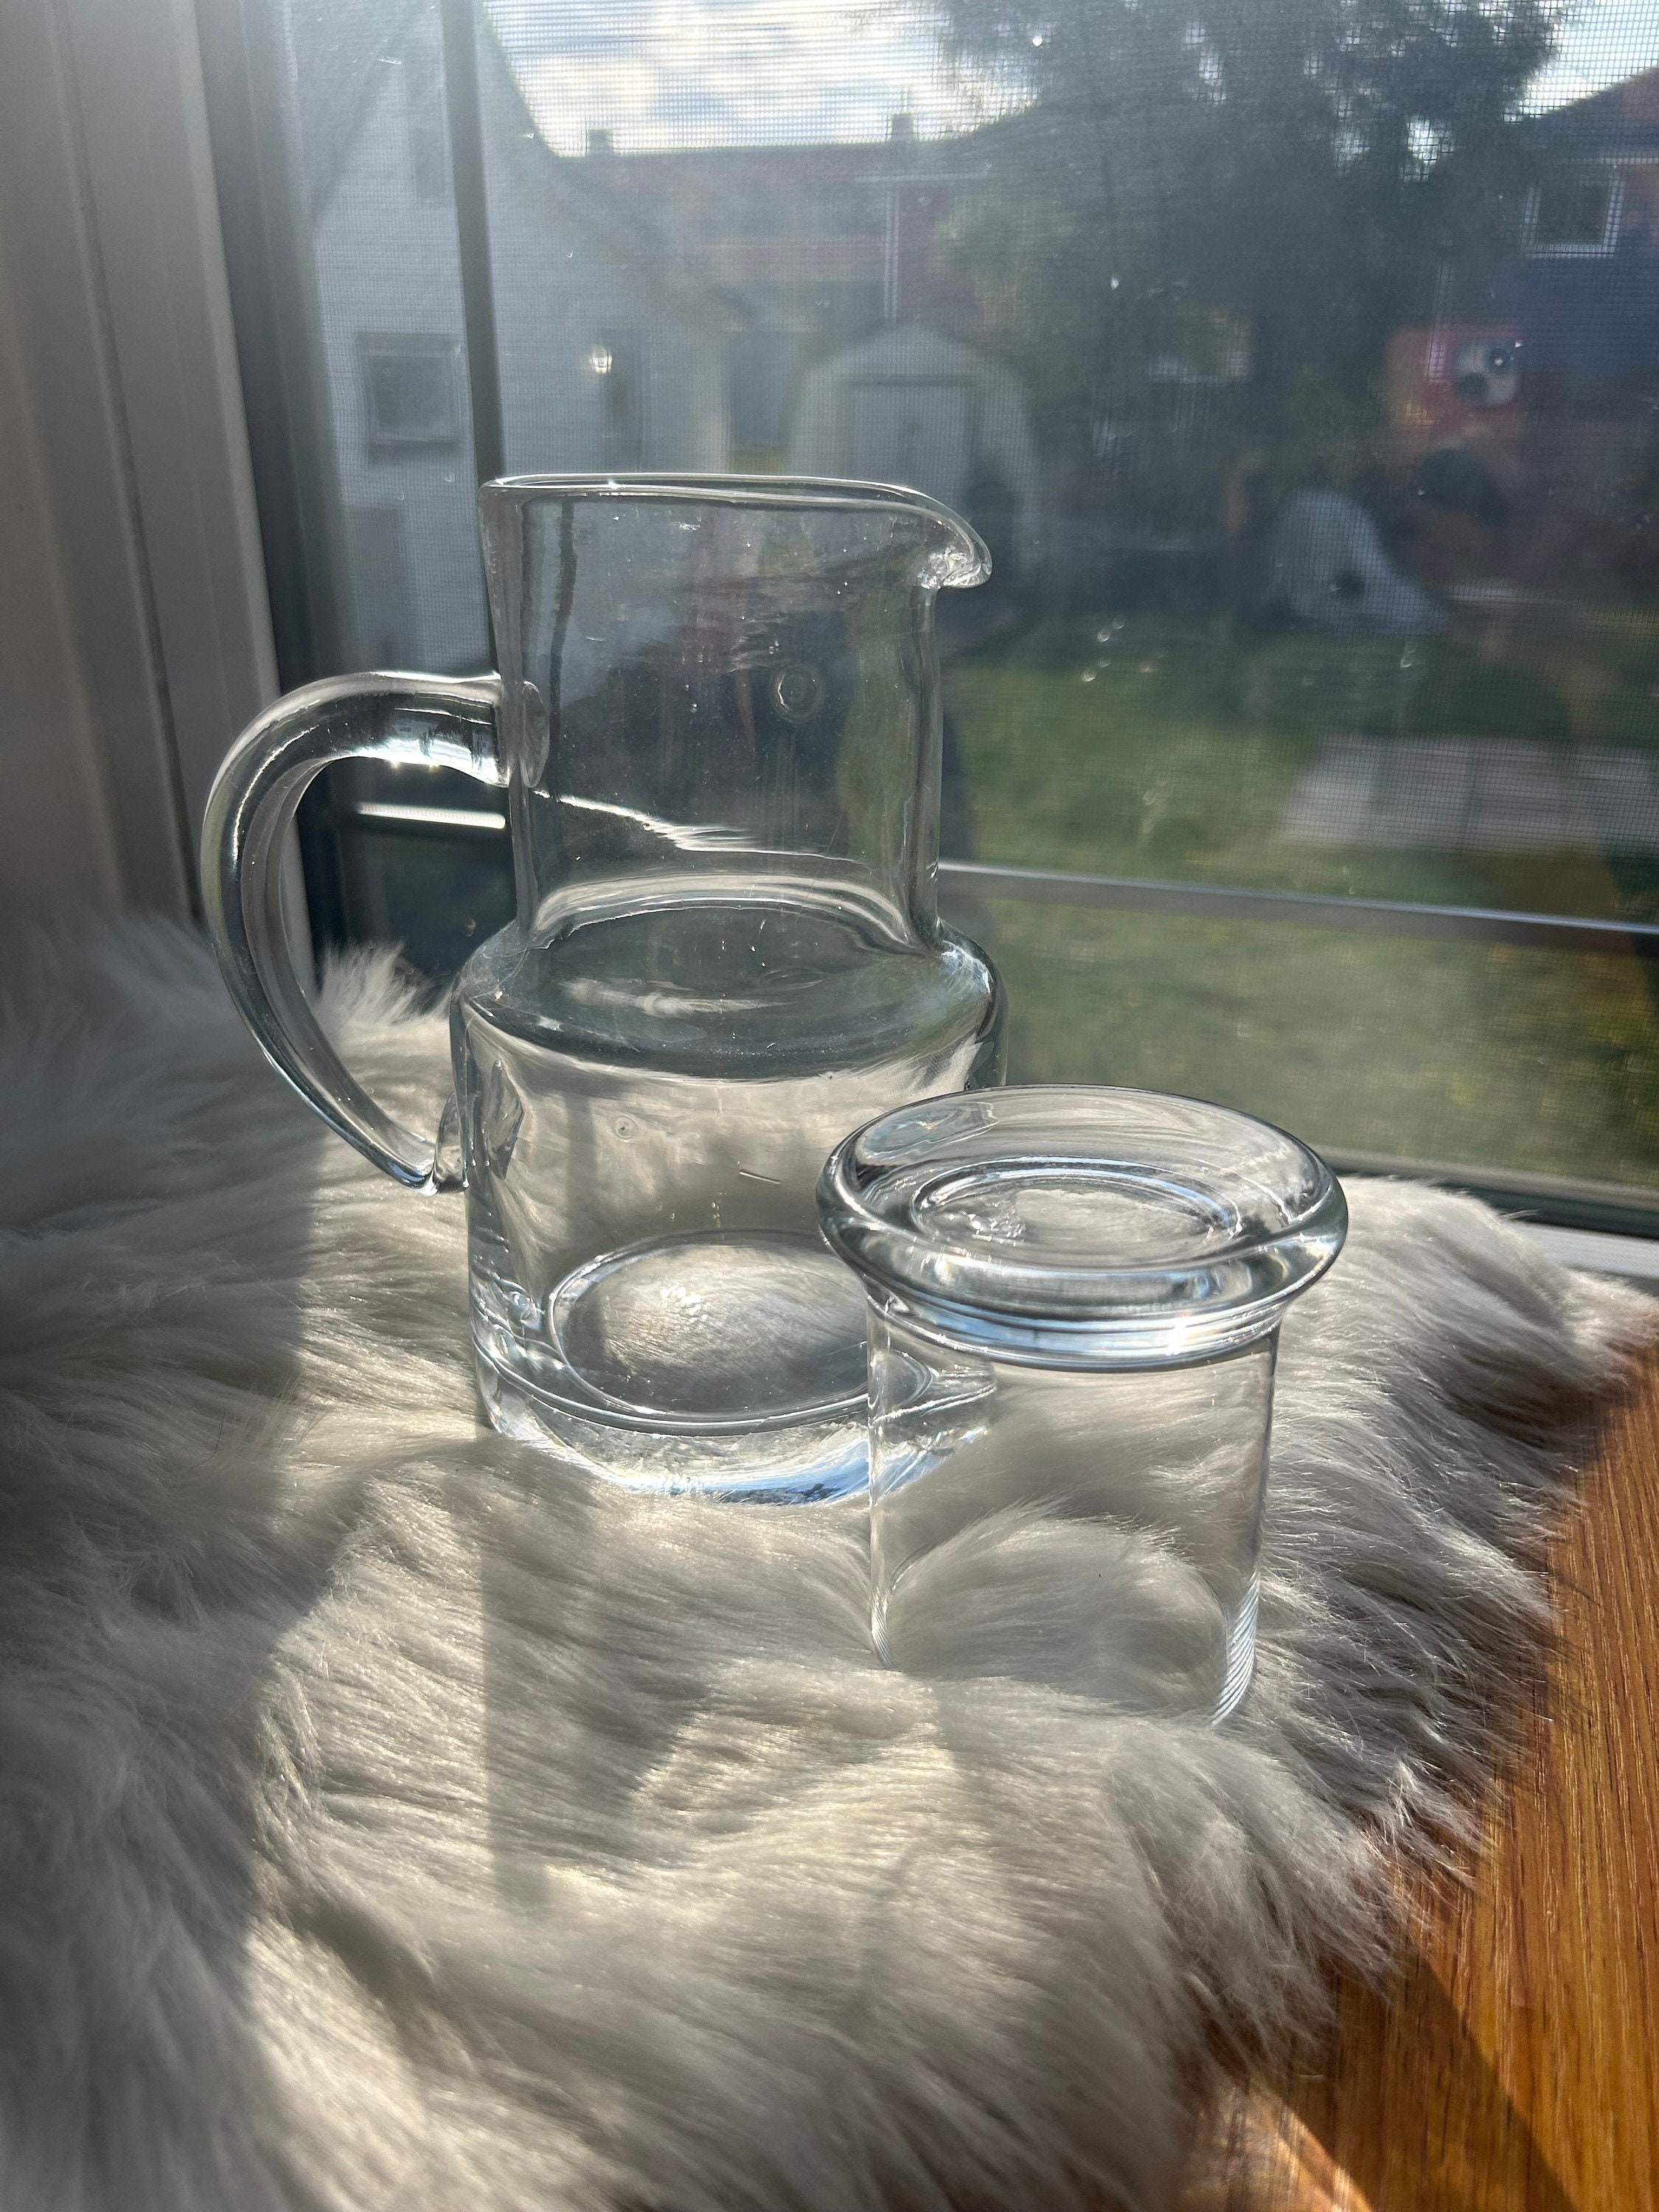 Bedside Water Carafe and Glass Set, Mfacoy 17 OZ Glass Pitcher & 5 OZ Cup,  Bedside Night Carafe Pitcher and Water Glass Tumbler Set, Vintage Glass